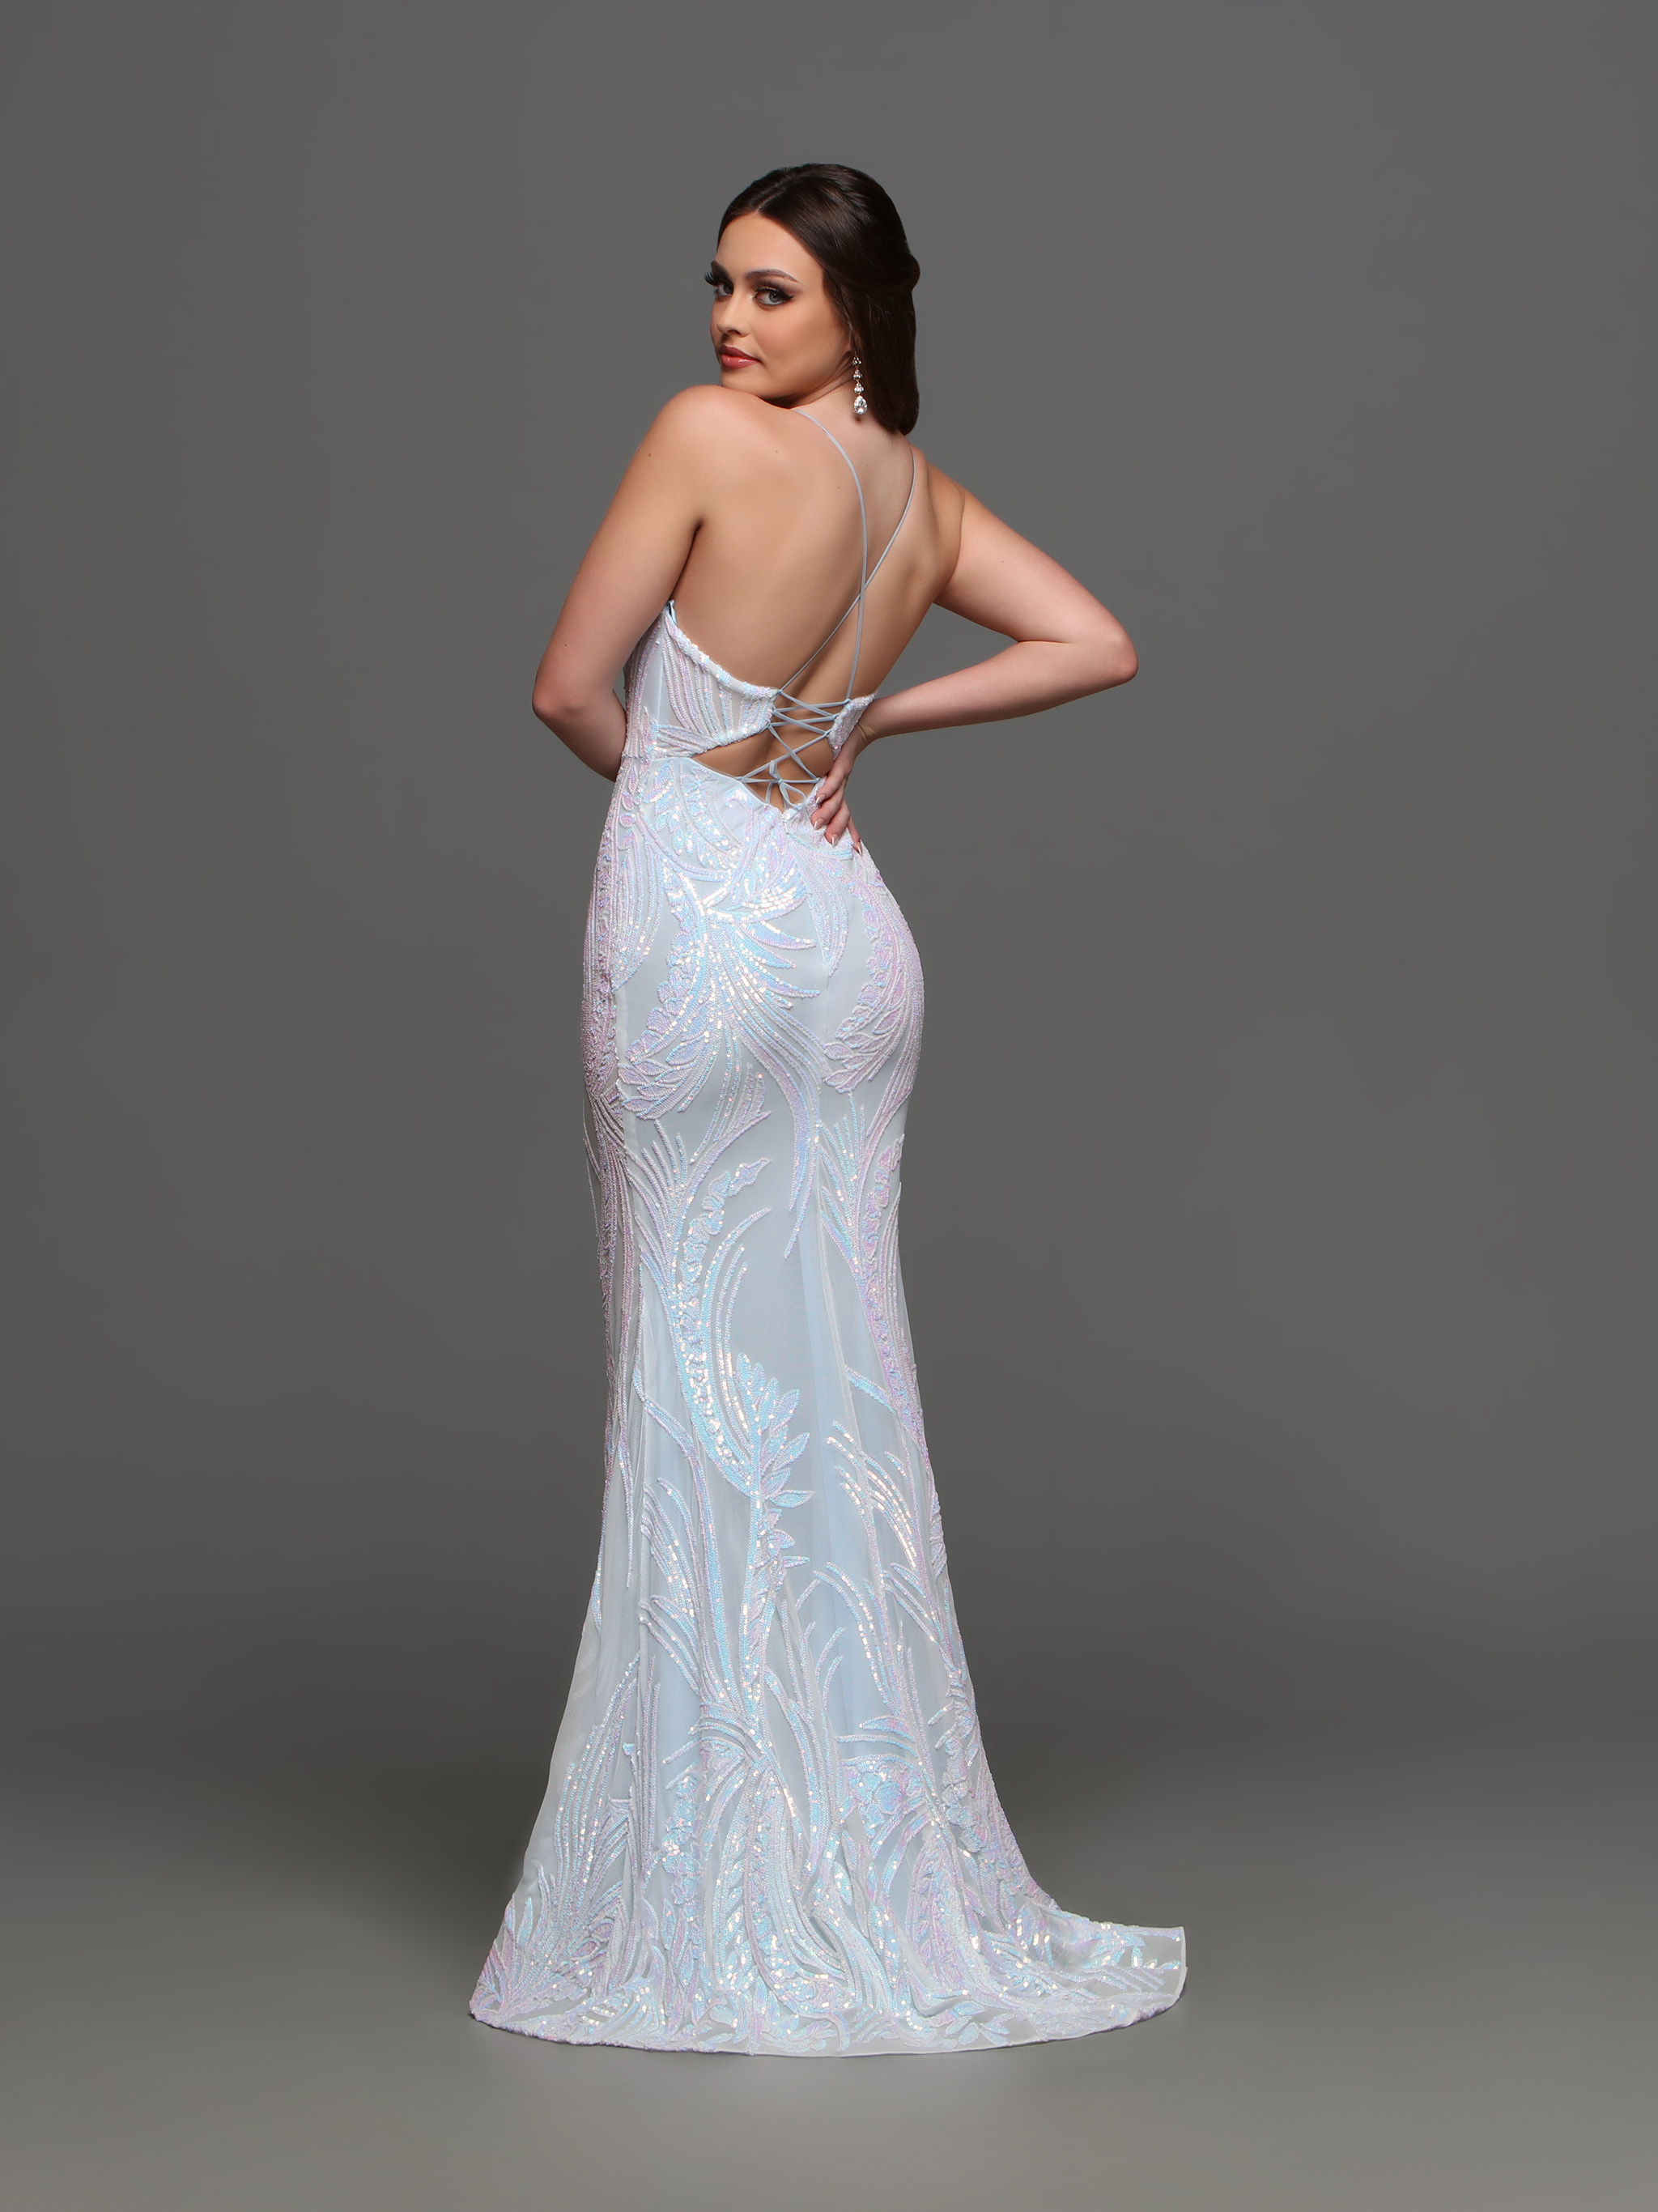 Image showing back view of style #72359